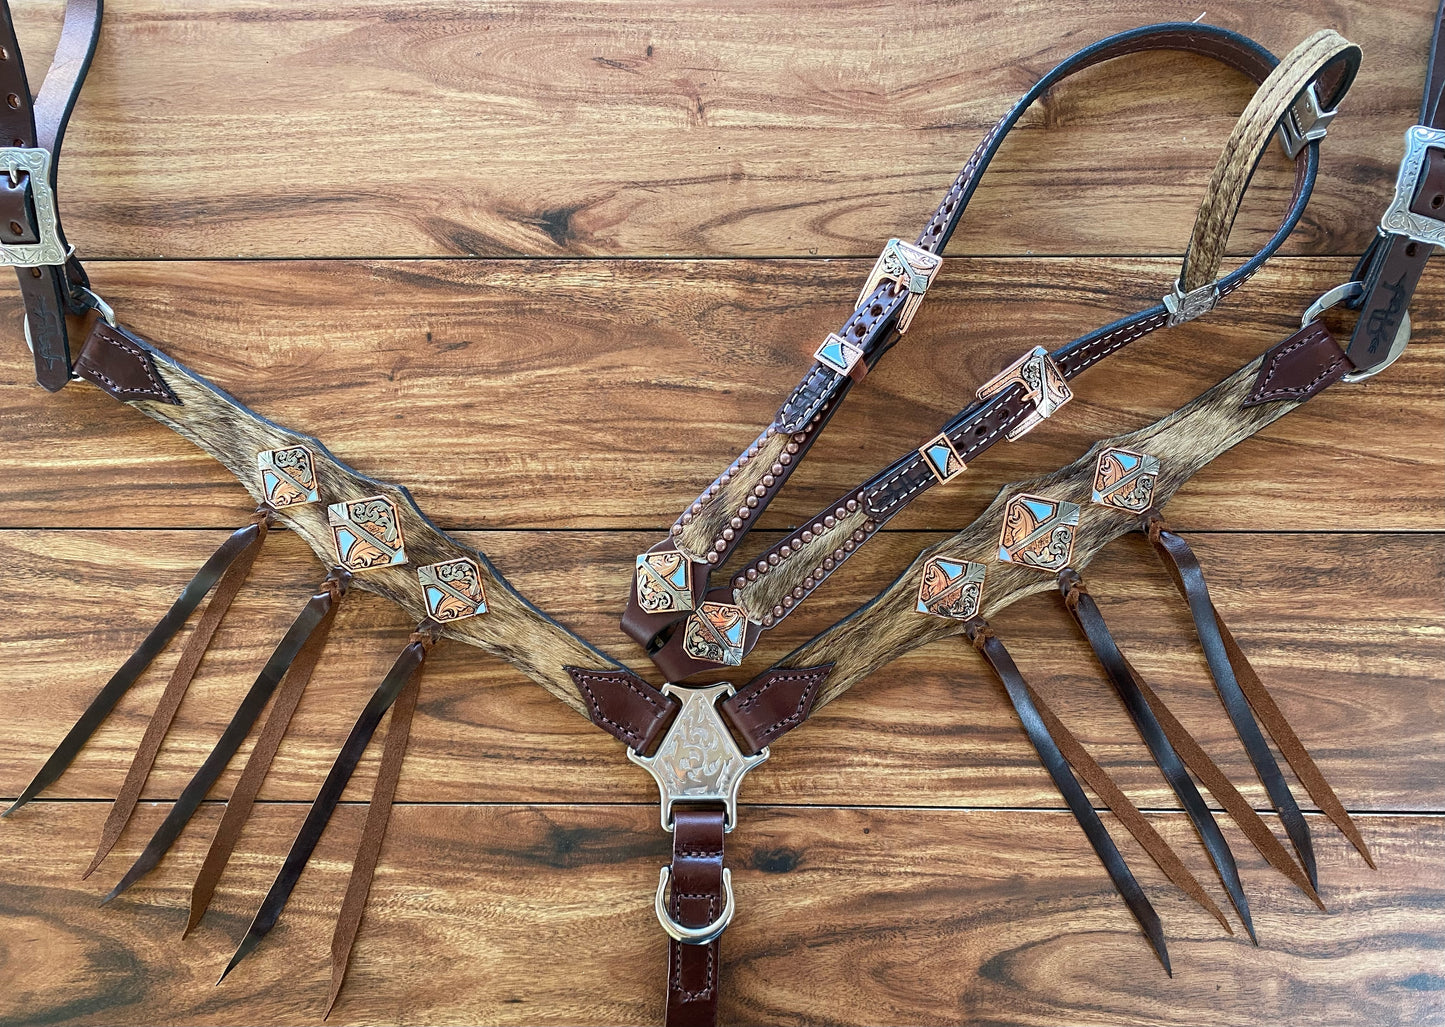 Cowhide with ties and arrow conchos